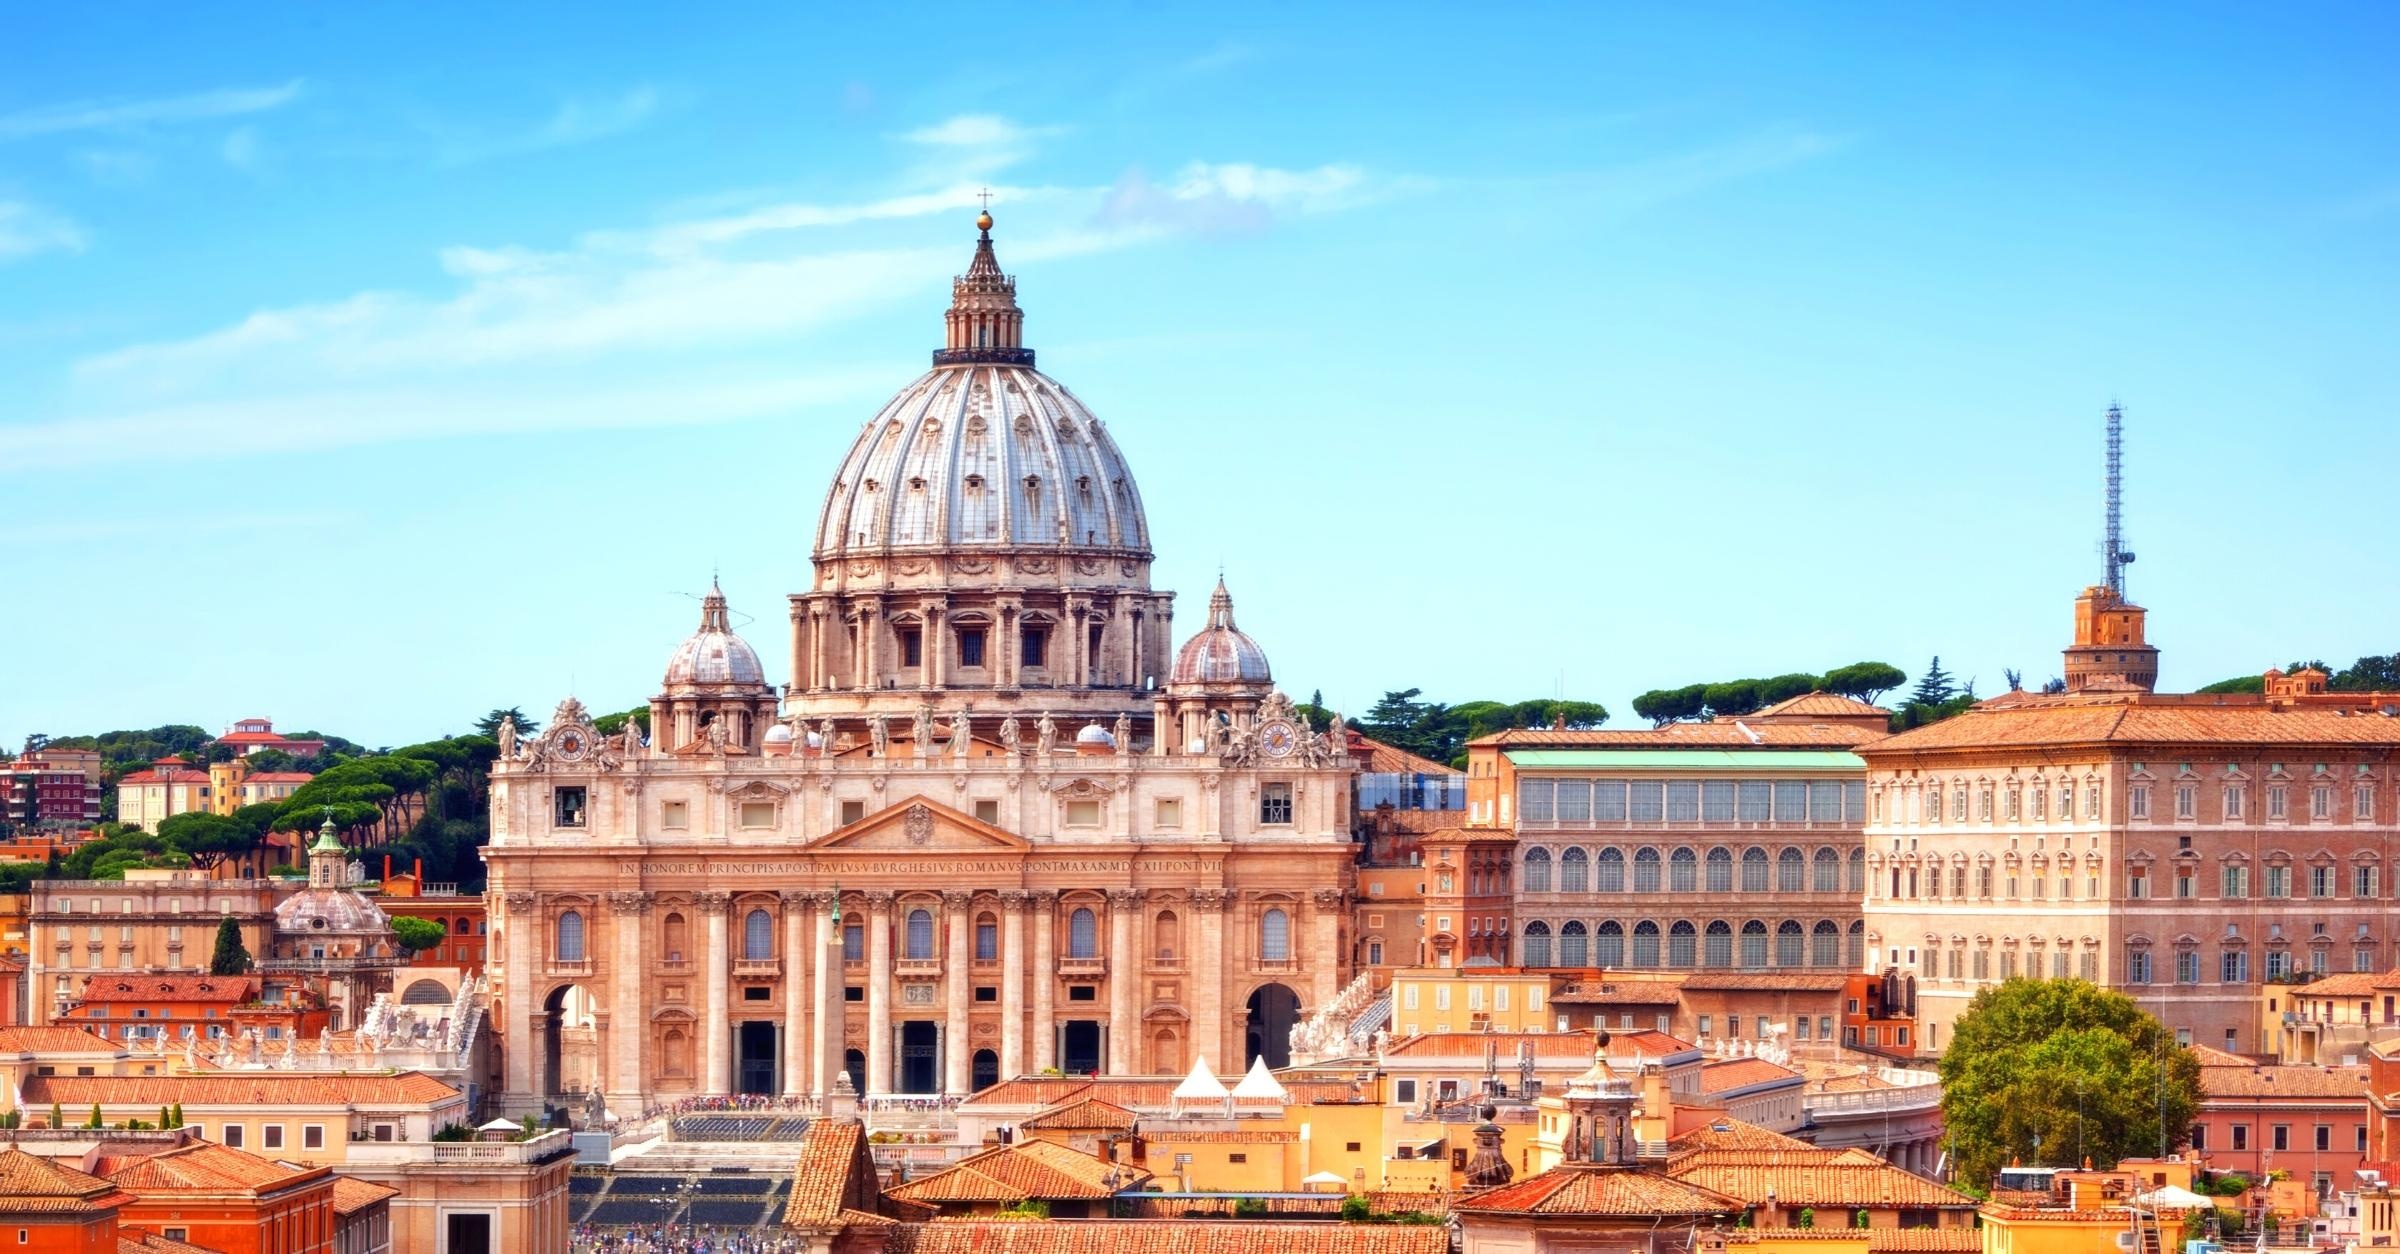 Vatican City Travels, Scam prevention, Safety guide, Travel advice, 2400x1260 HD Desktop